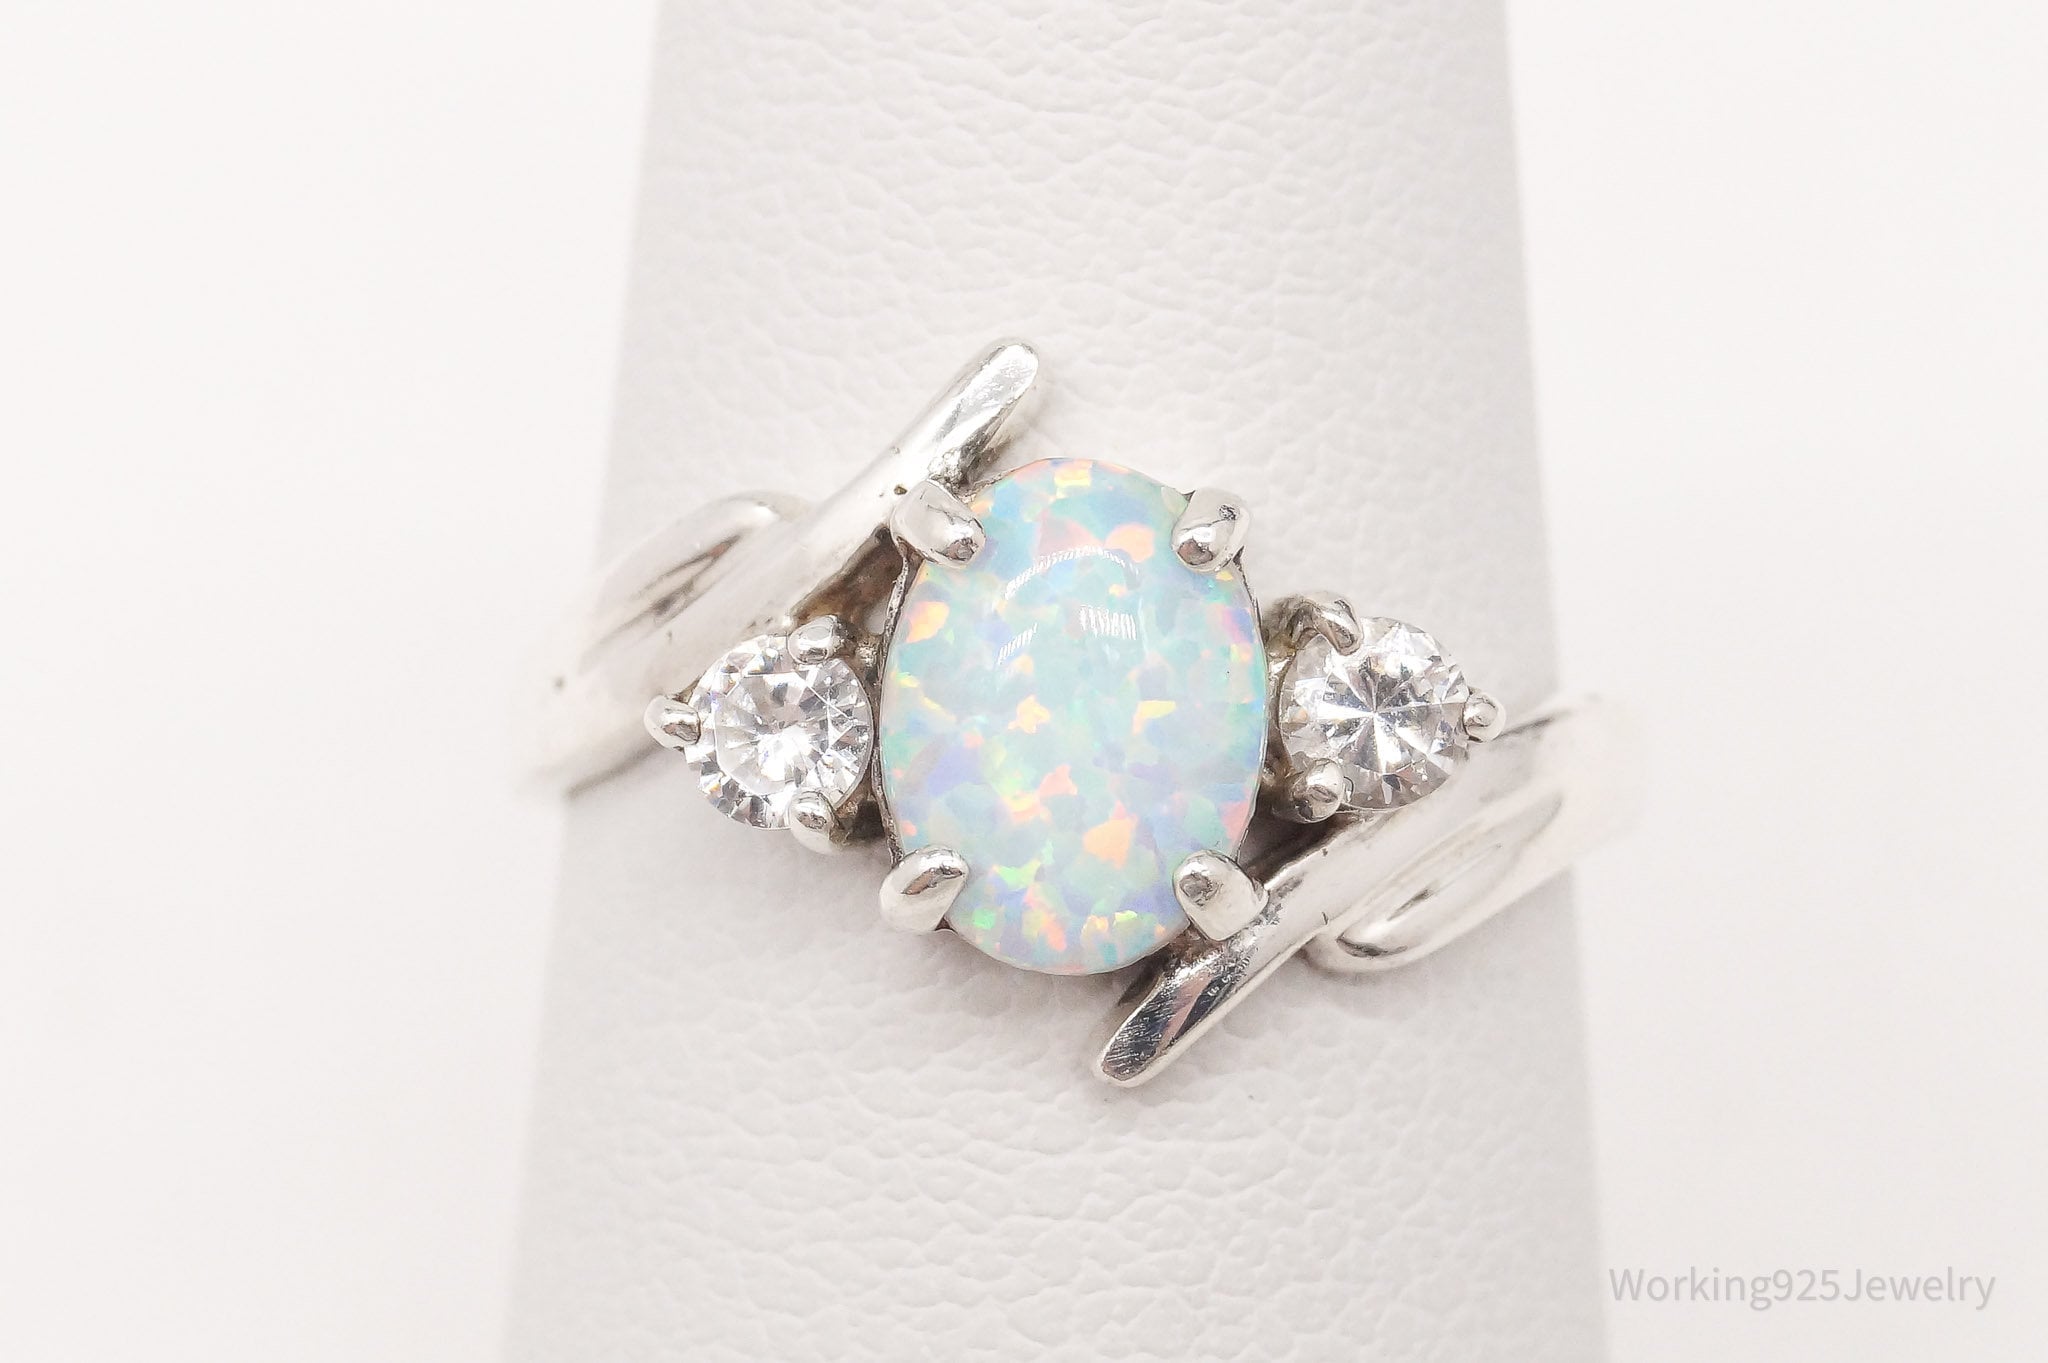 Vintage Opal Cubic Zirconia Sterling Silver Ring - Size 6.25